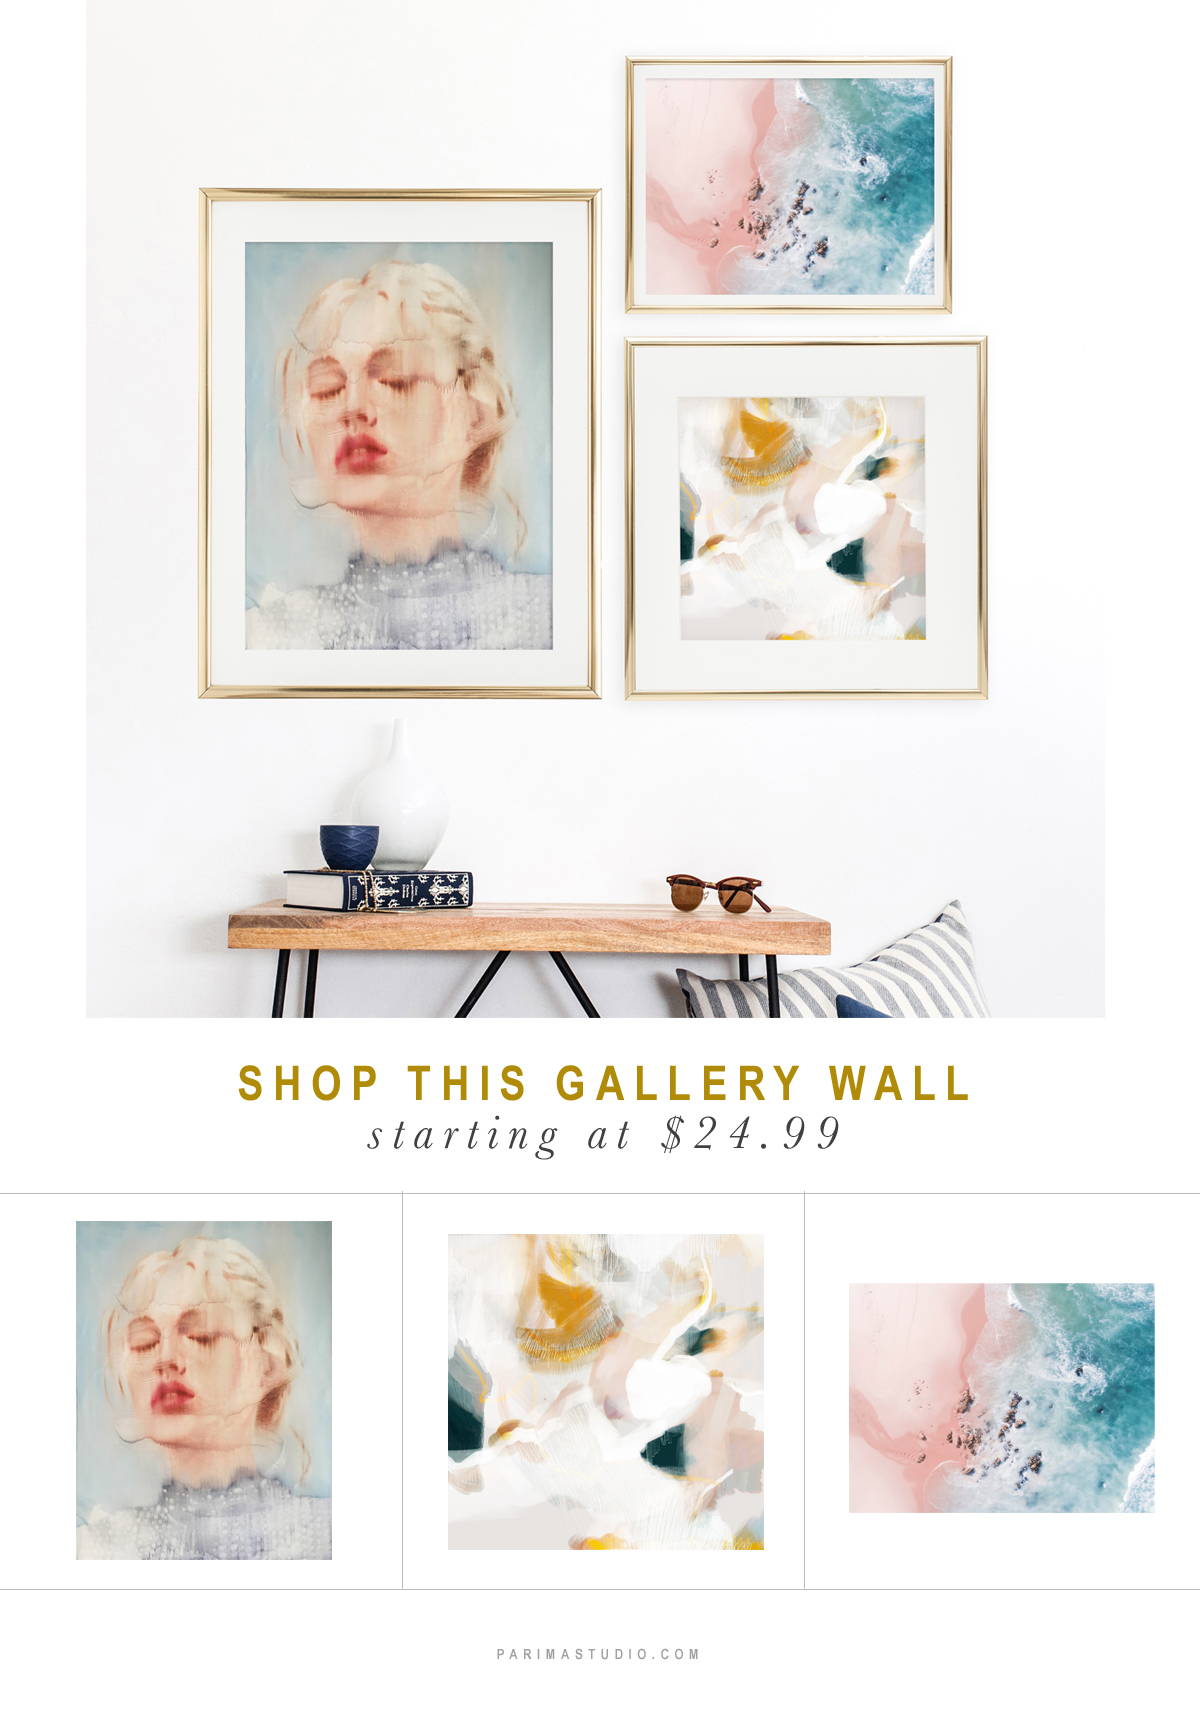 Shop this done-for-you gallery wall via Parima Studio